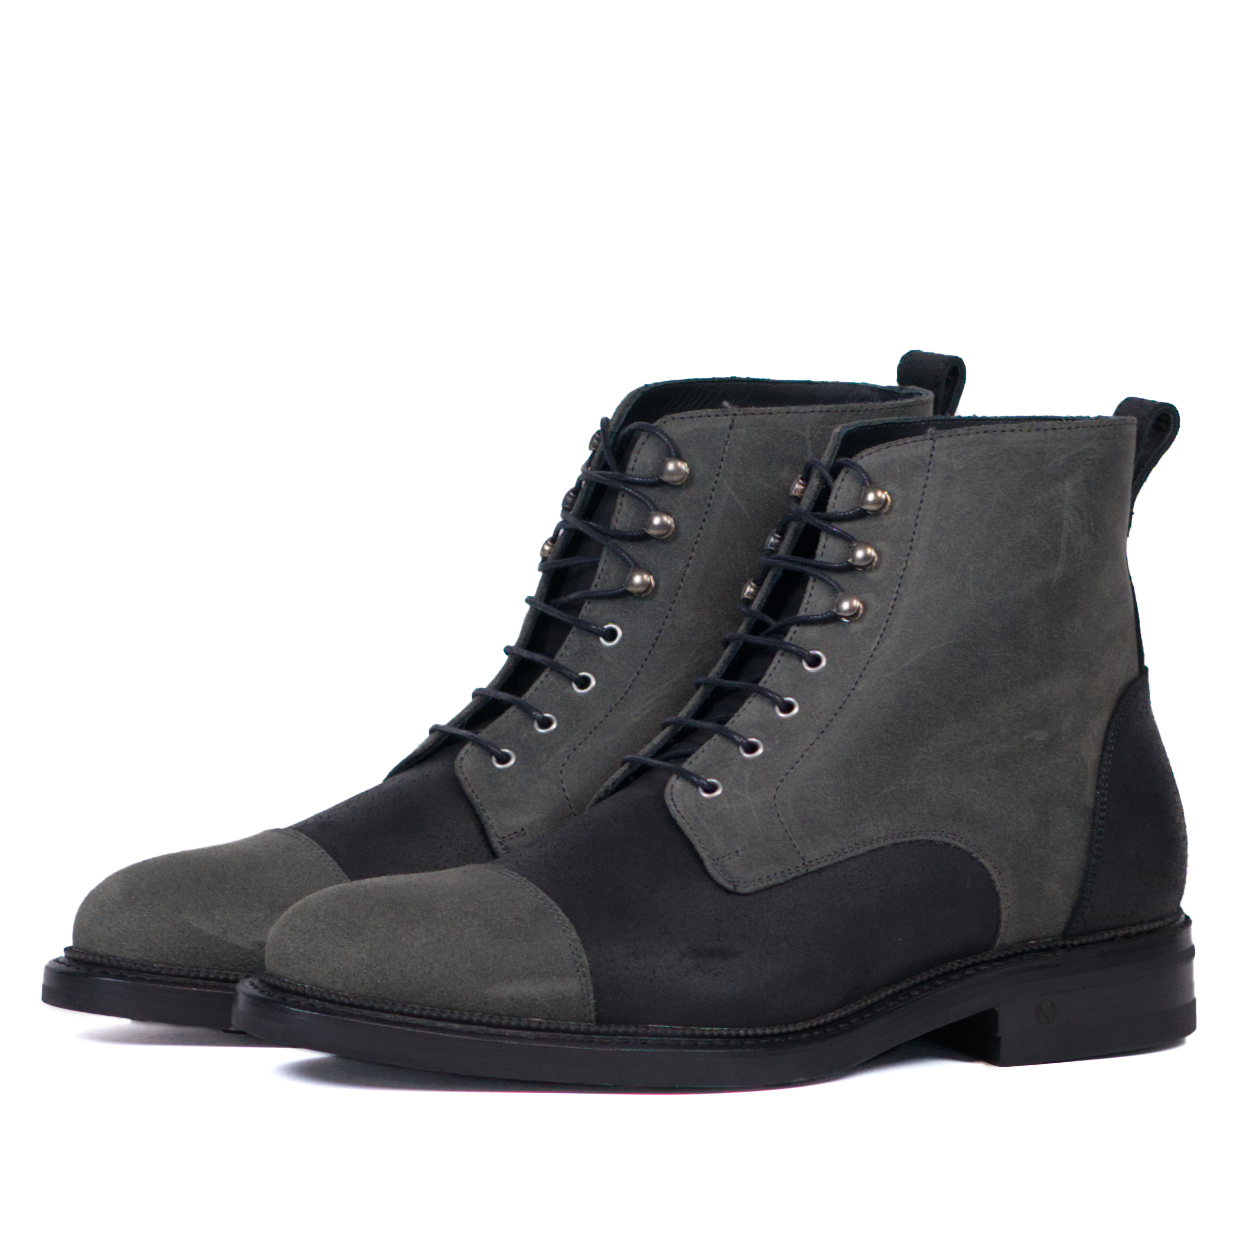 Logan Boot Wax Suede Black and Grey